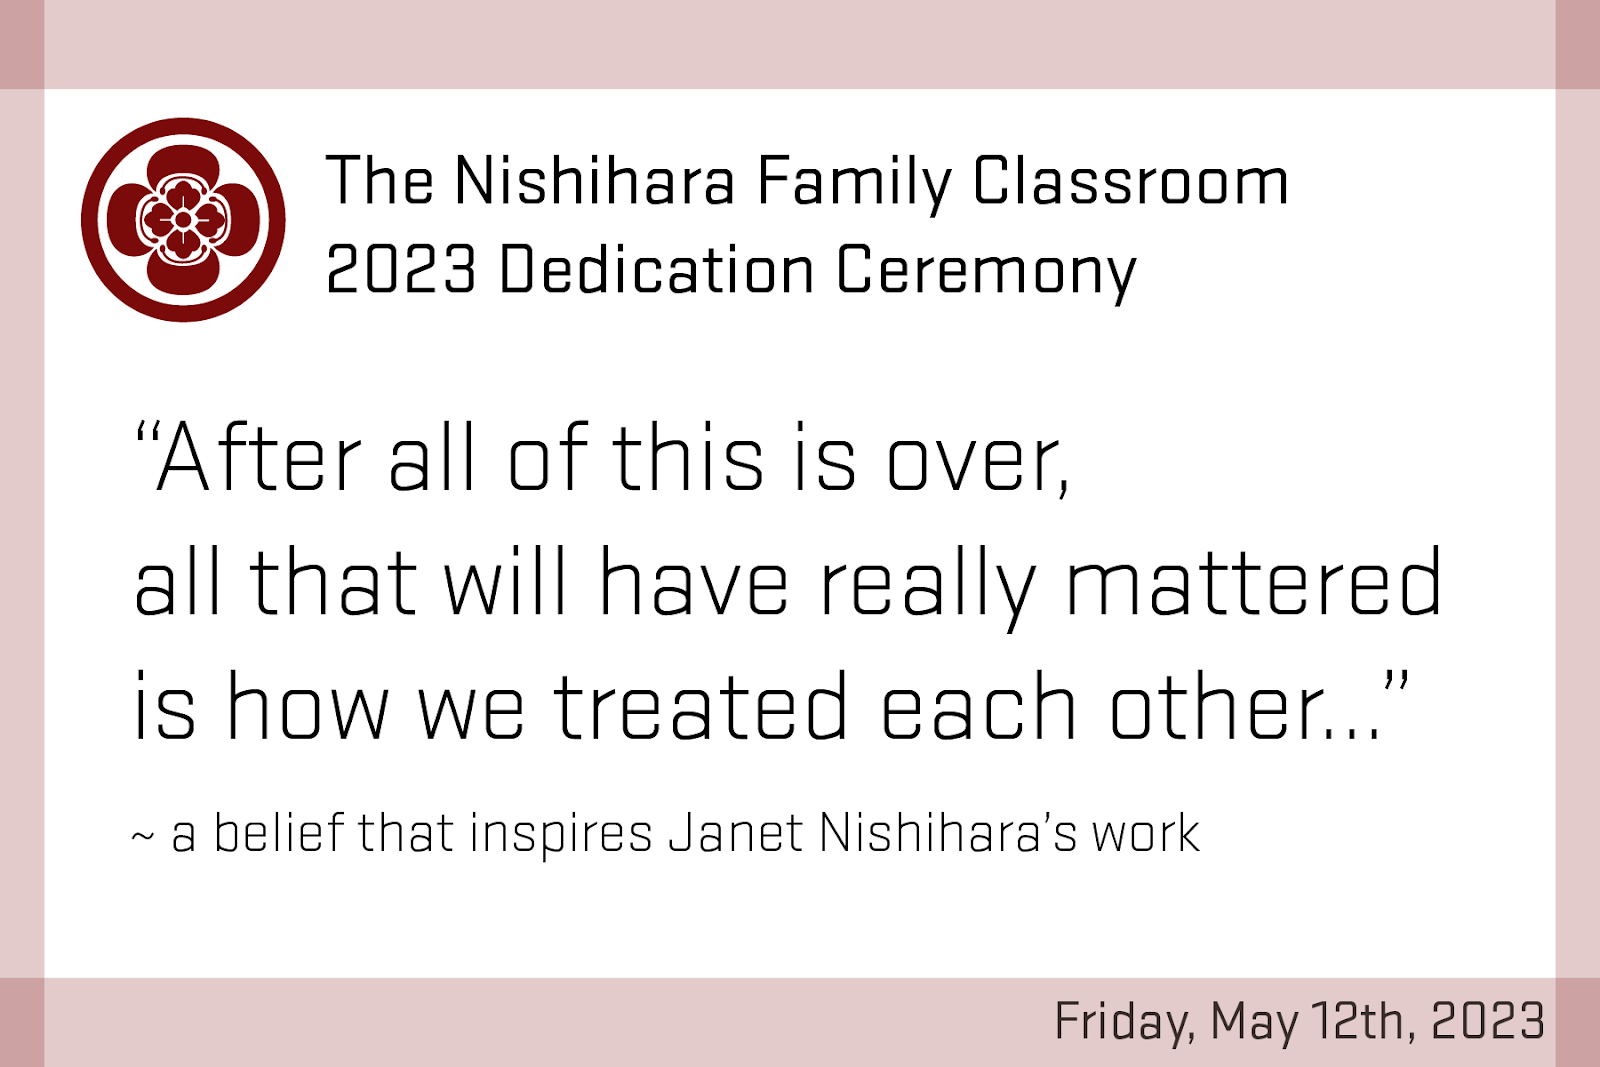 Postcard. The Nishihara Family Classroom 2023 Dedication Ceremony. 'After all of this is over, all that will have really mattered is how we treated each other…' ~ a belief that inspires Janet Nishihara's work. Friday, May 12th, 2023.